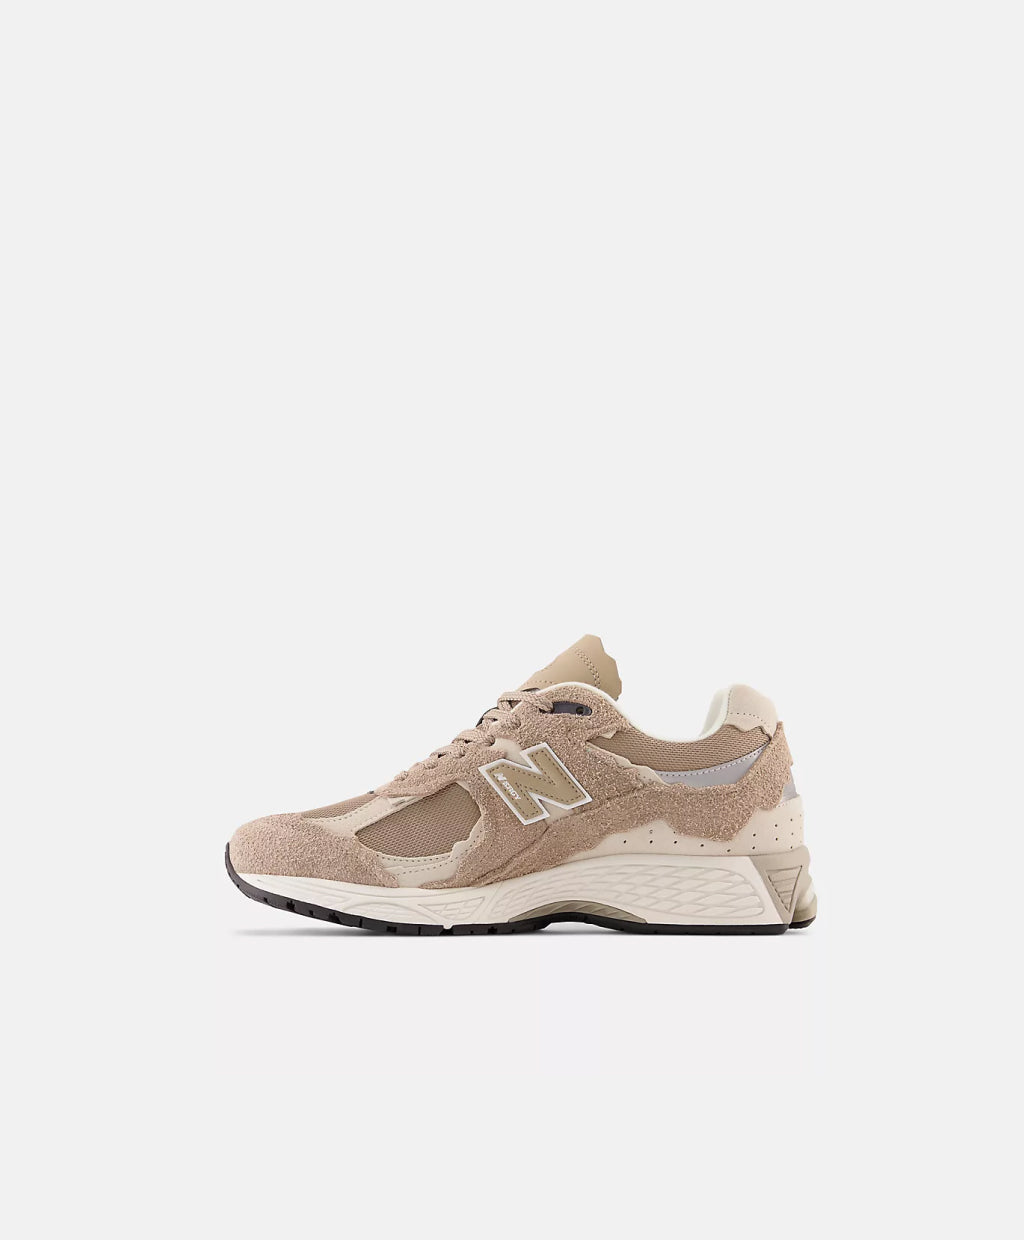 NEW BALANCE M2002RDL PROTECTION PACK DRIFTWOOD